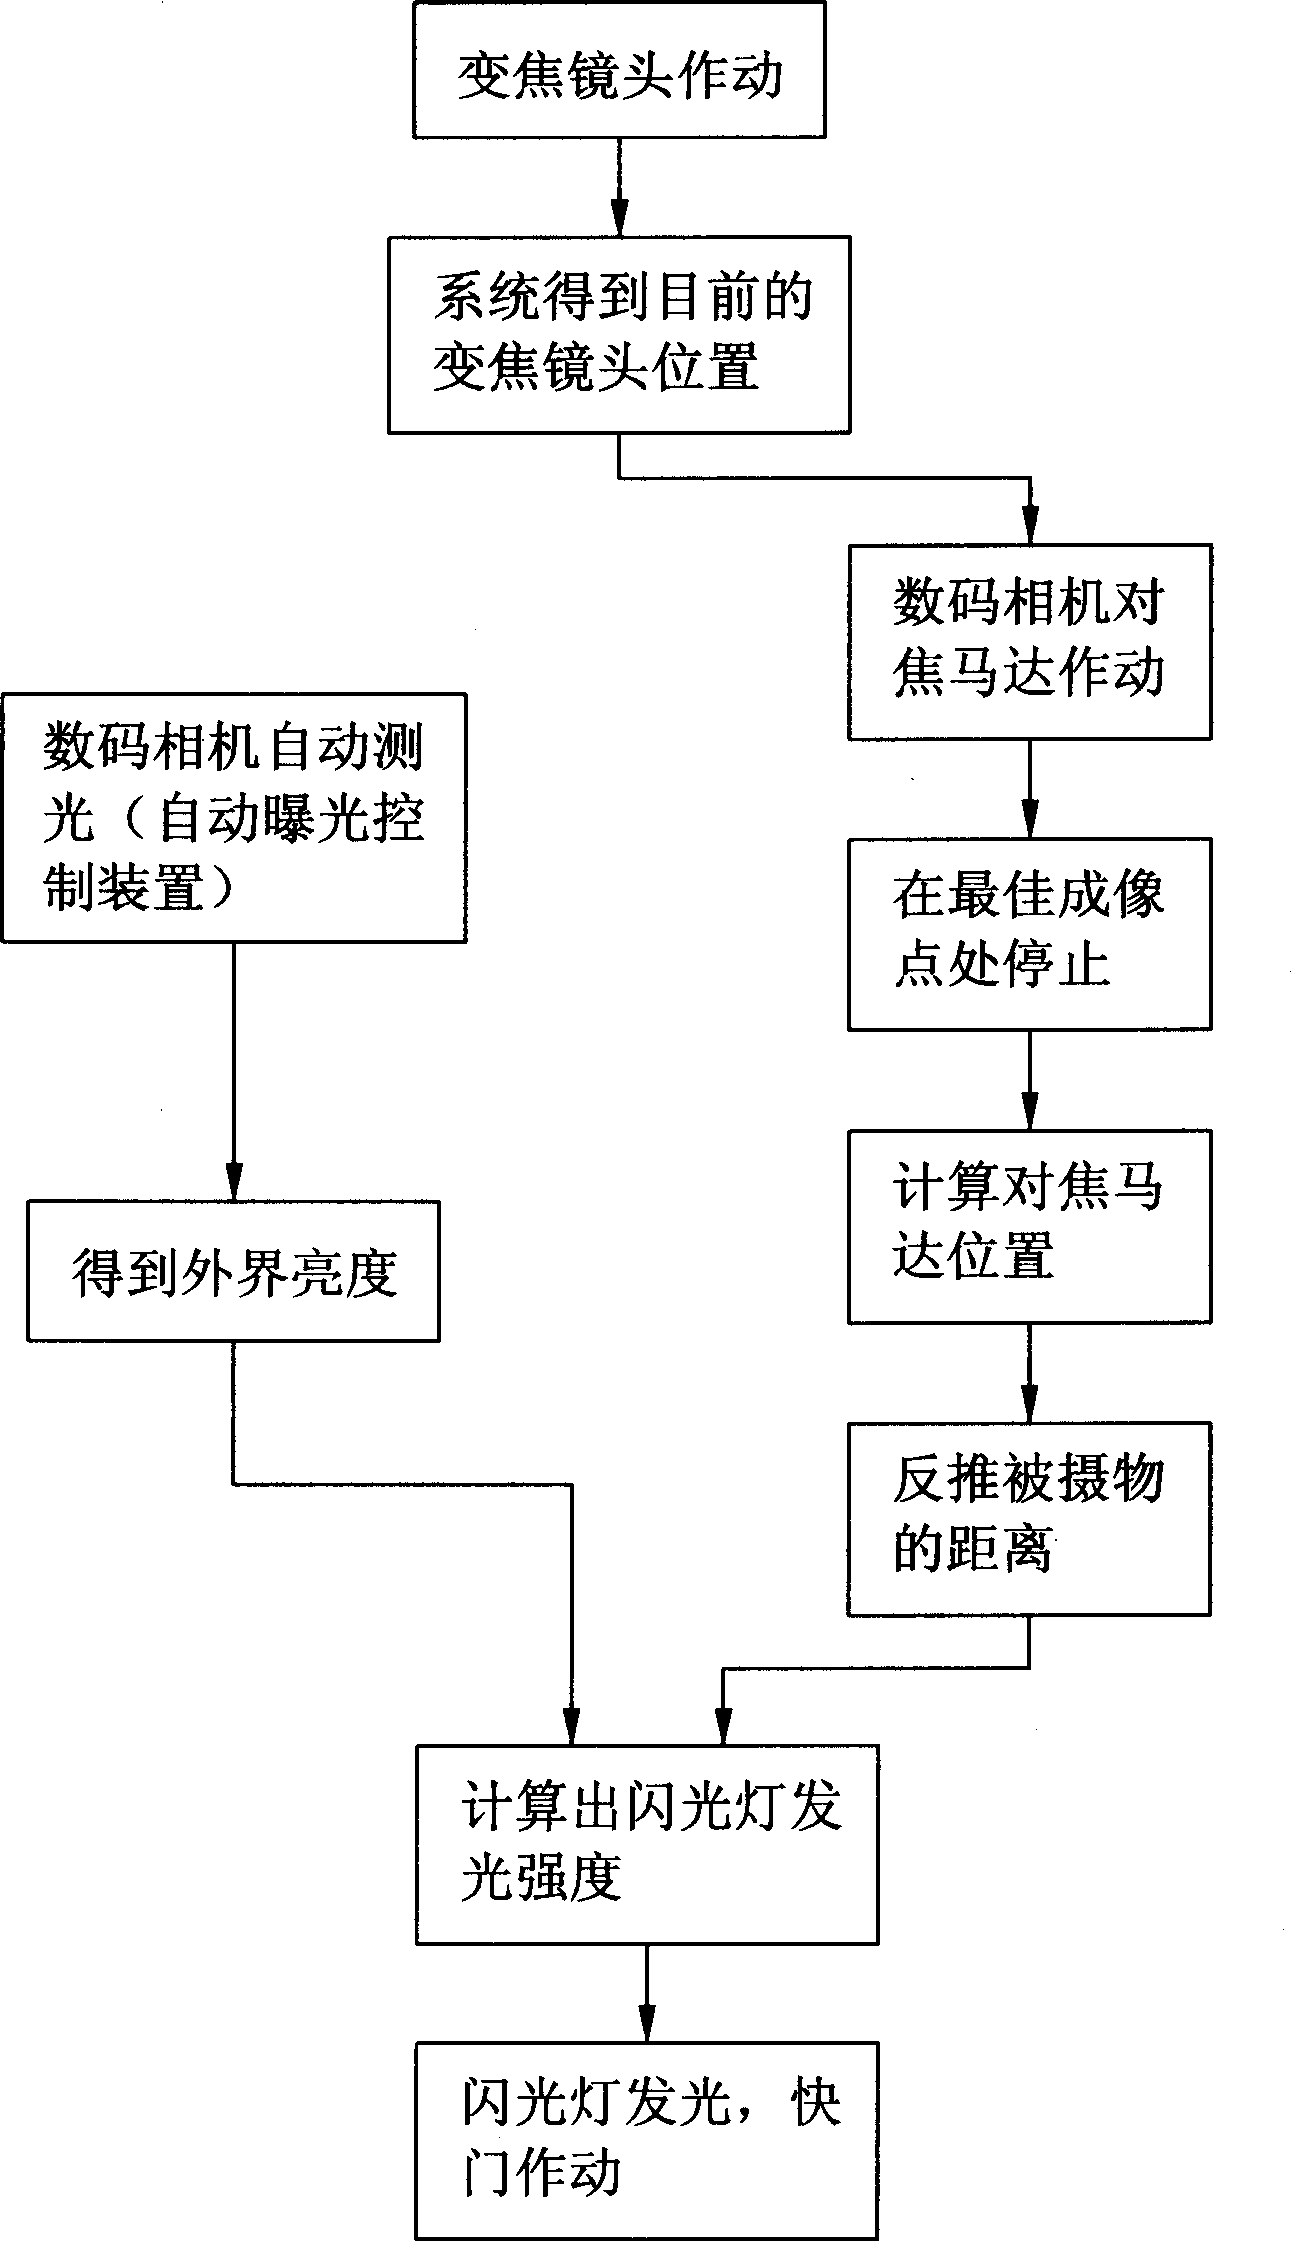 Method and system for automatically adjusting flash strength for camera